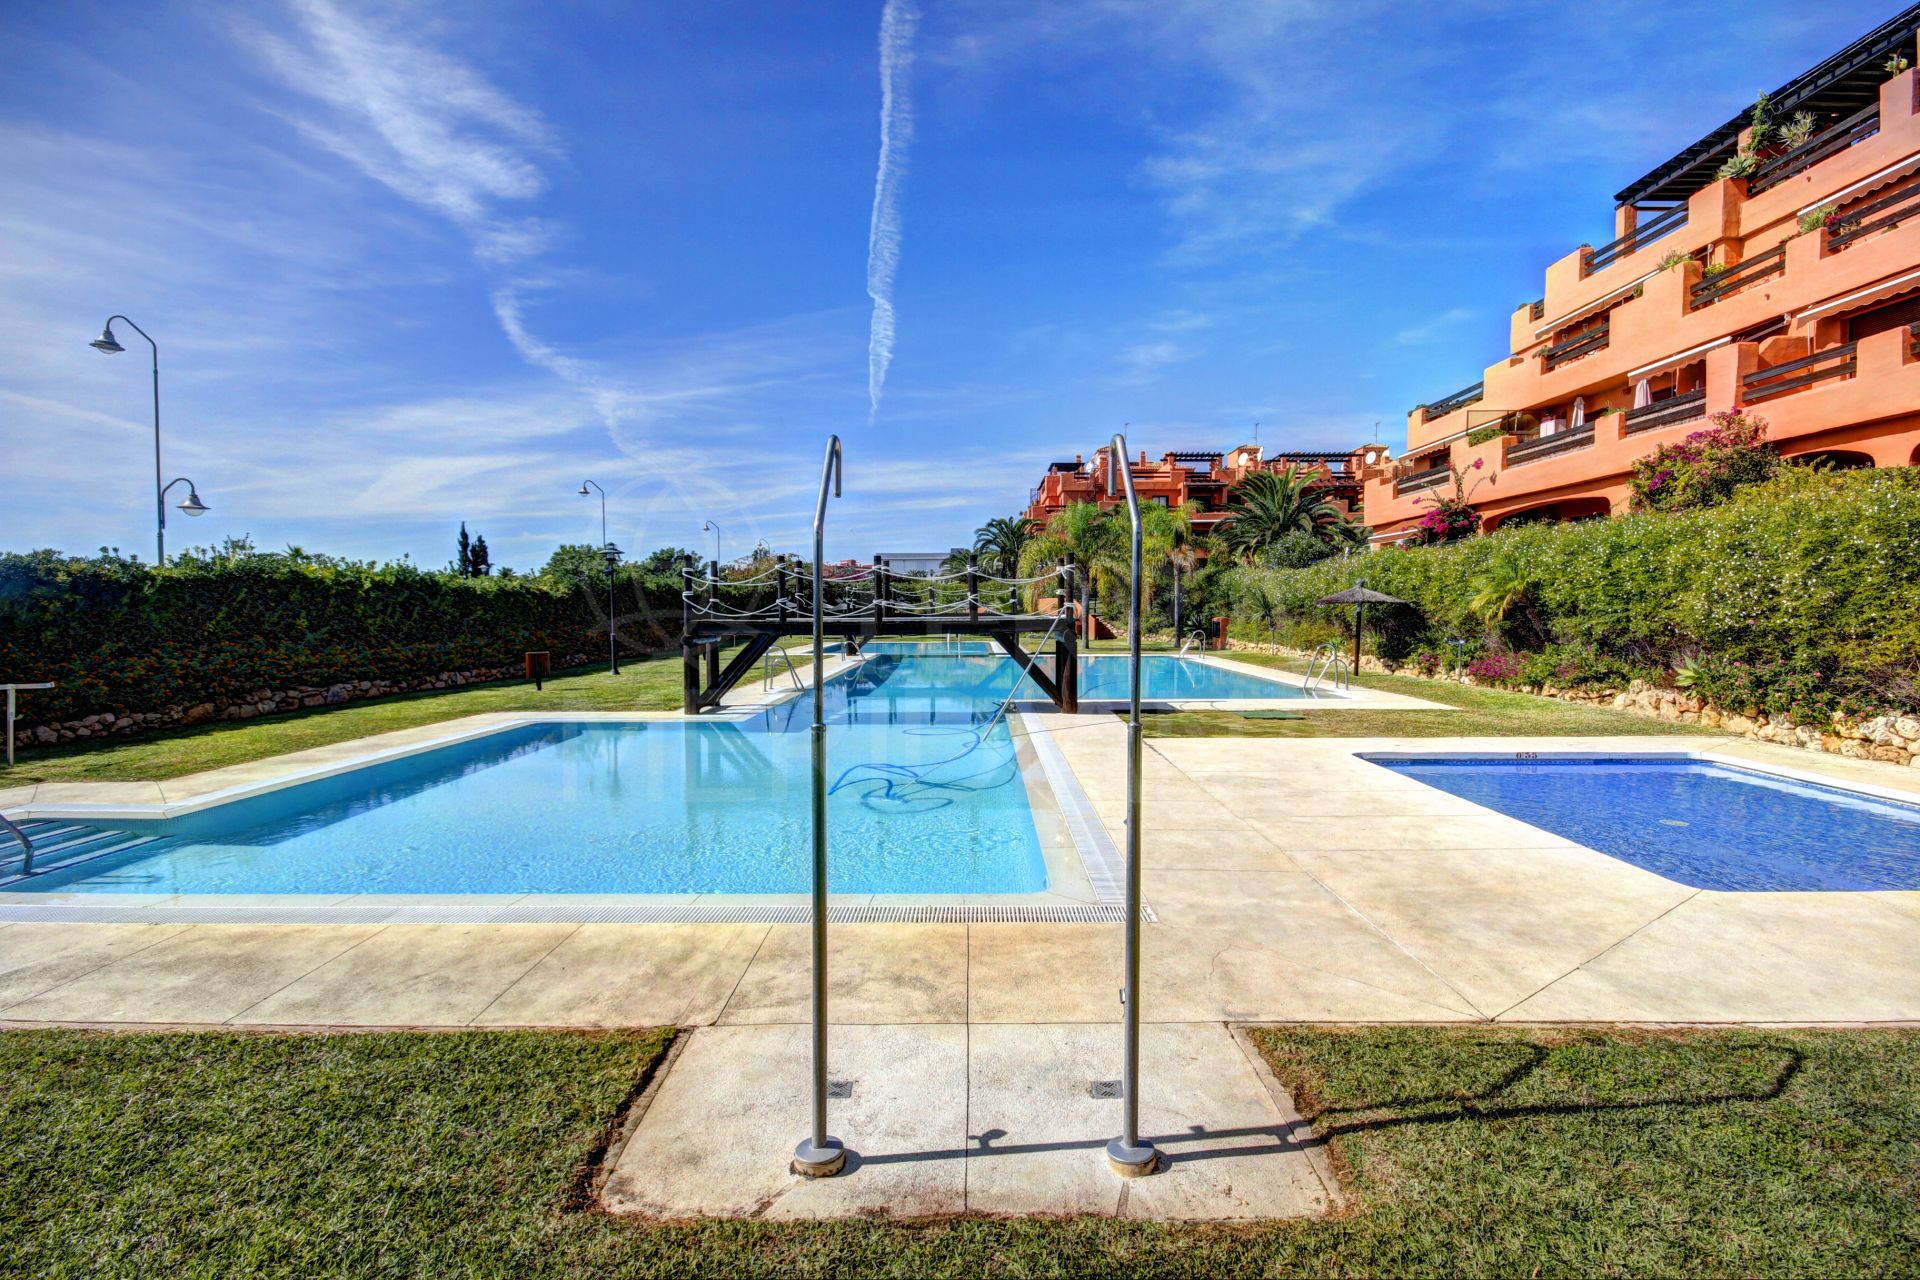 Ground floor apartment for sale in the front line beach community of Playa del Angel, Estepona